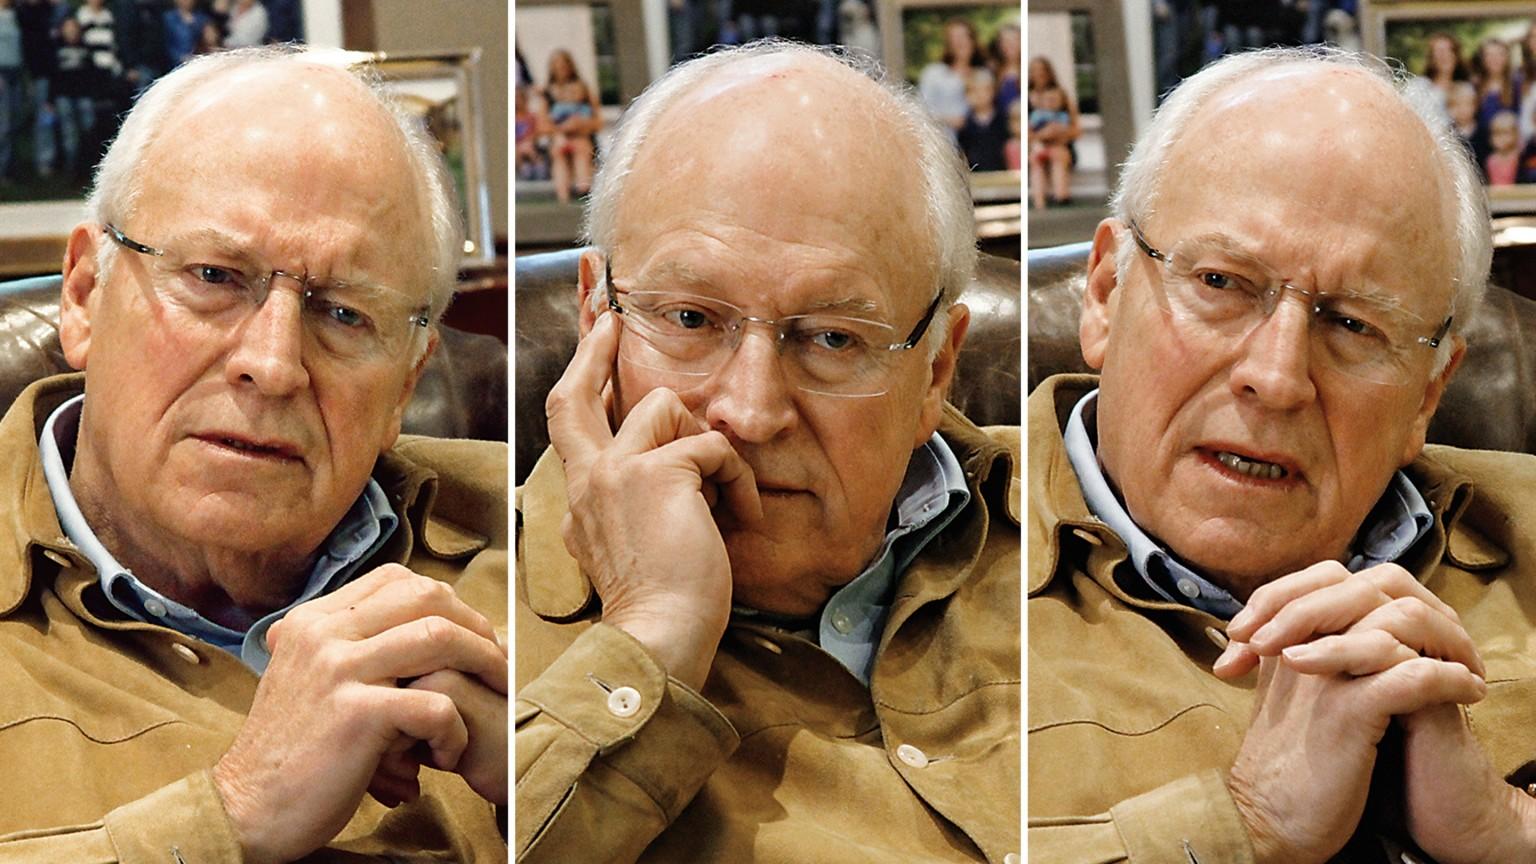 The April 2015 Playboy Interview With Dick Cheney